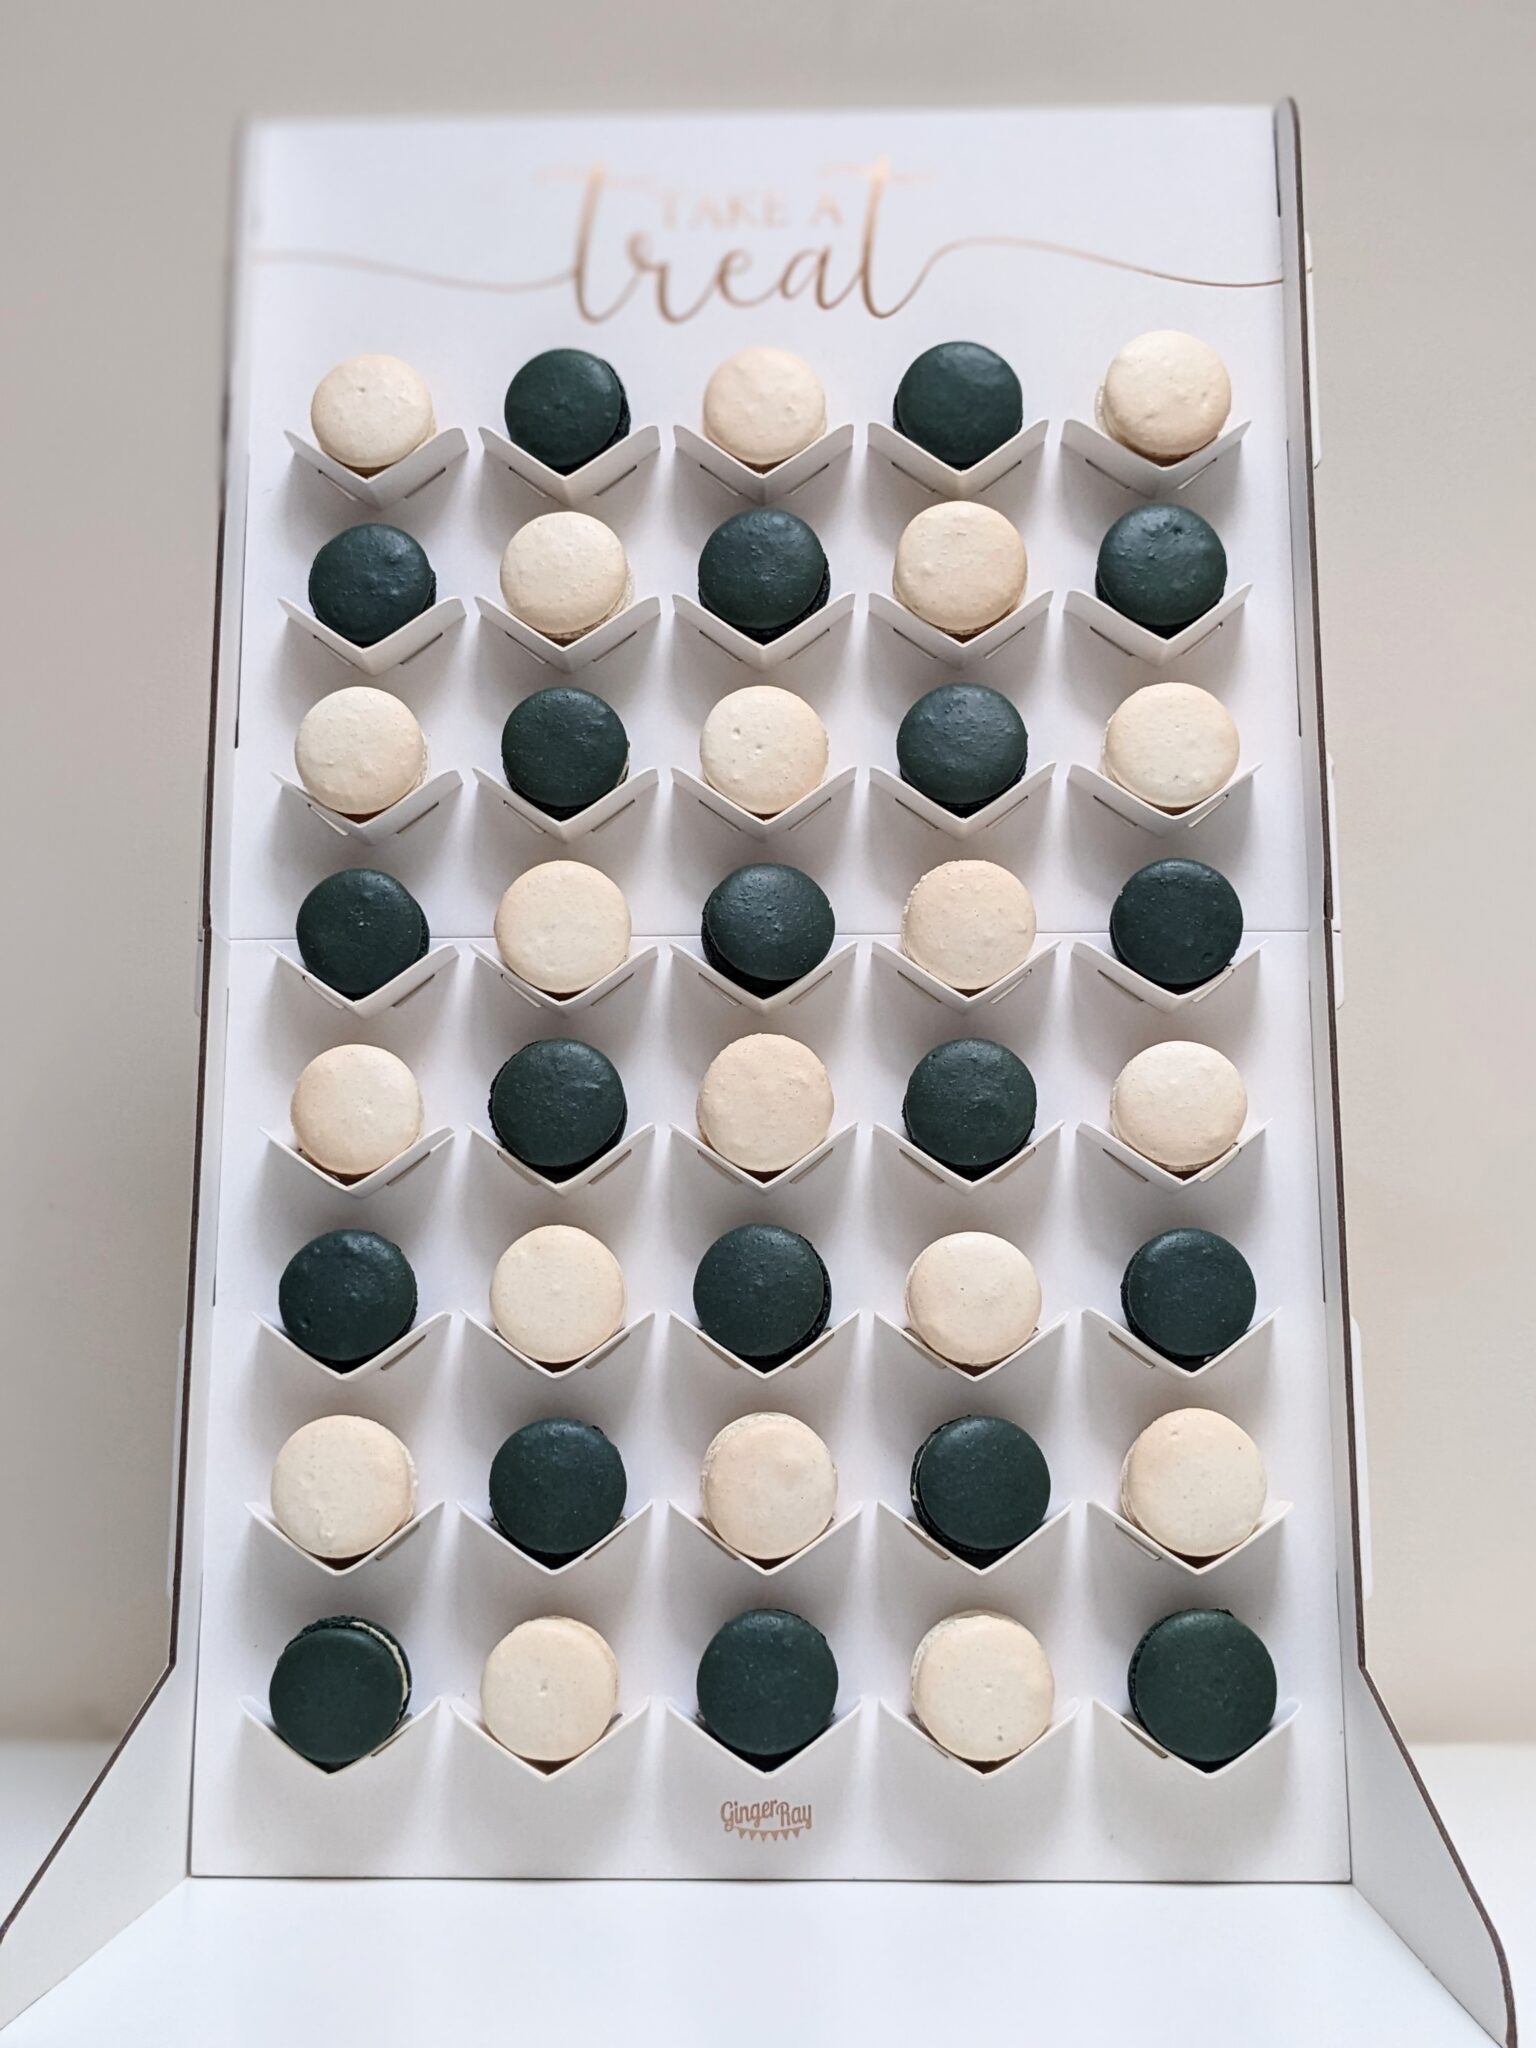 Macaron display stand to exhibit 40 macarons for any event or celebration.